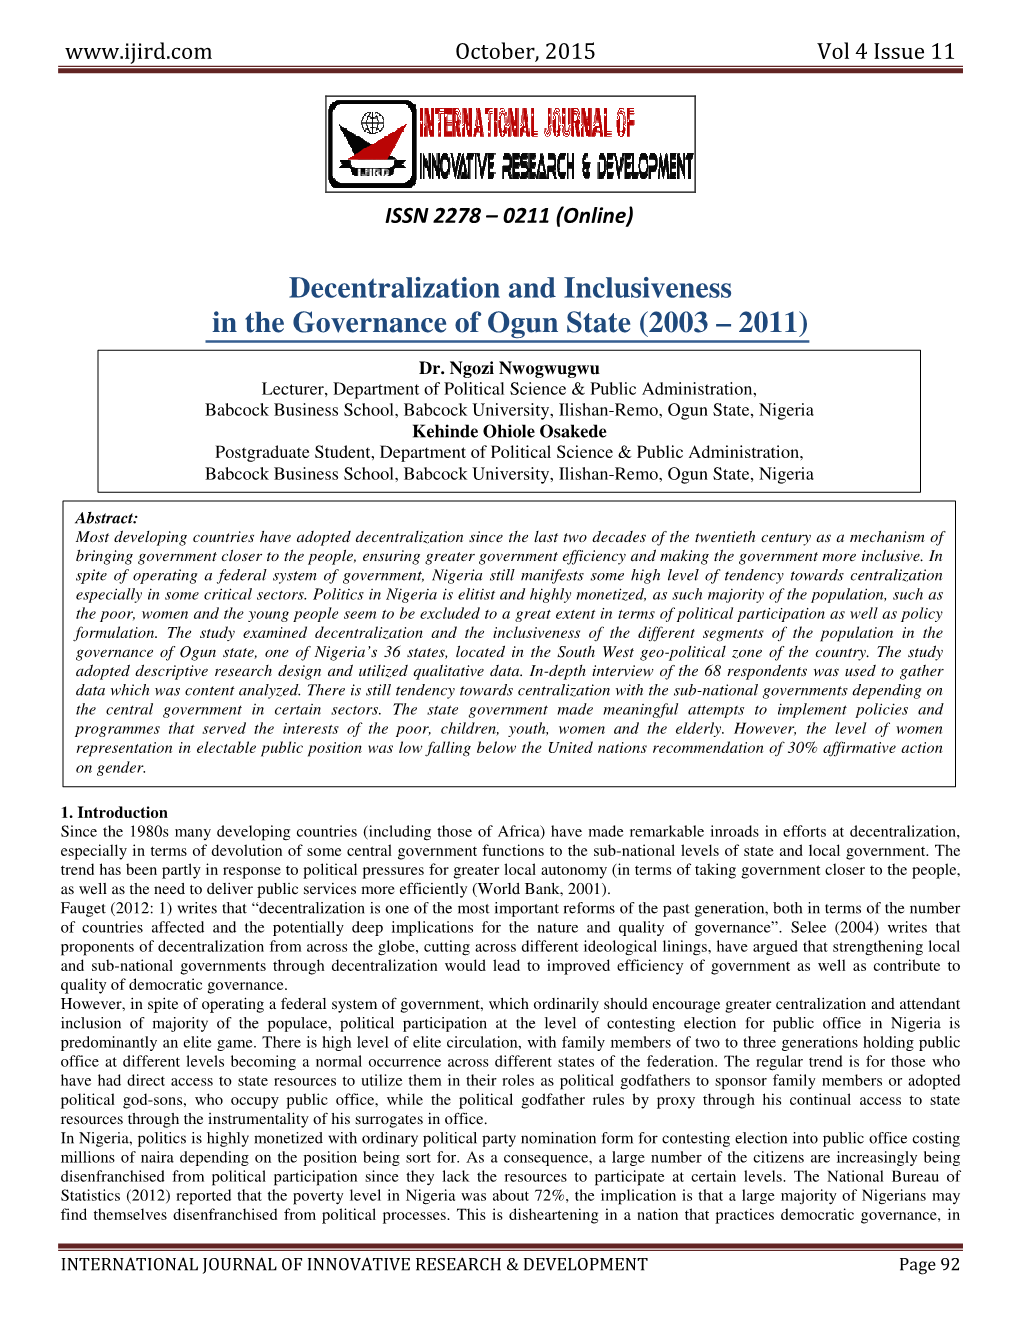 Decentralization and Inclusiveness in the Governance of Ogun State (2003 – 2011)